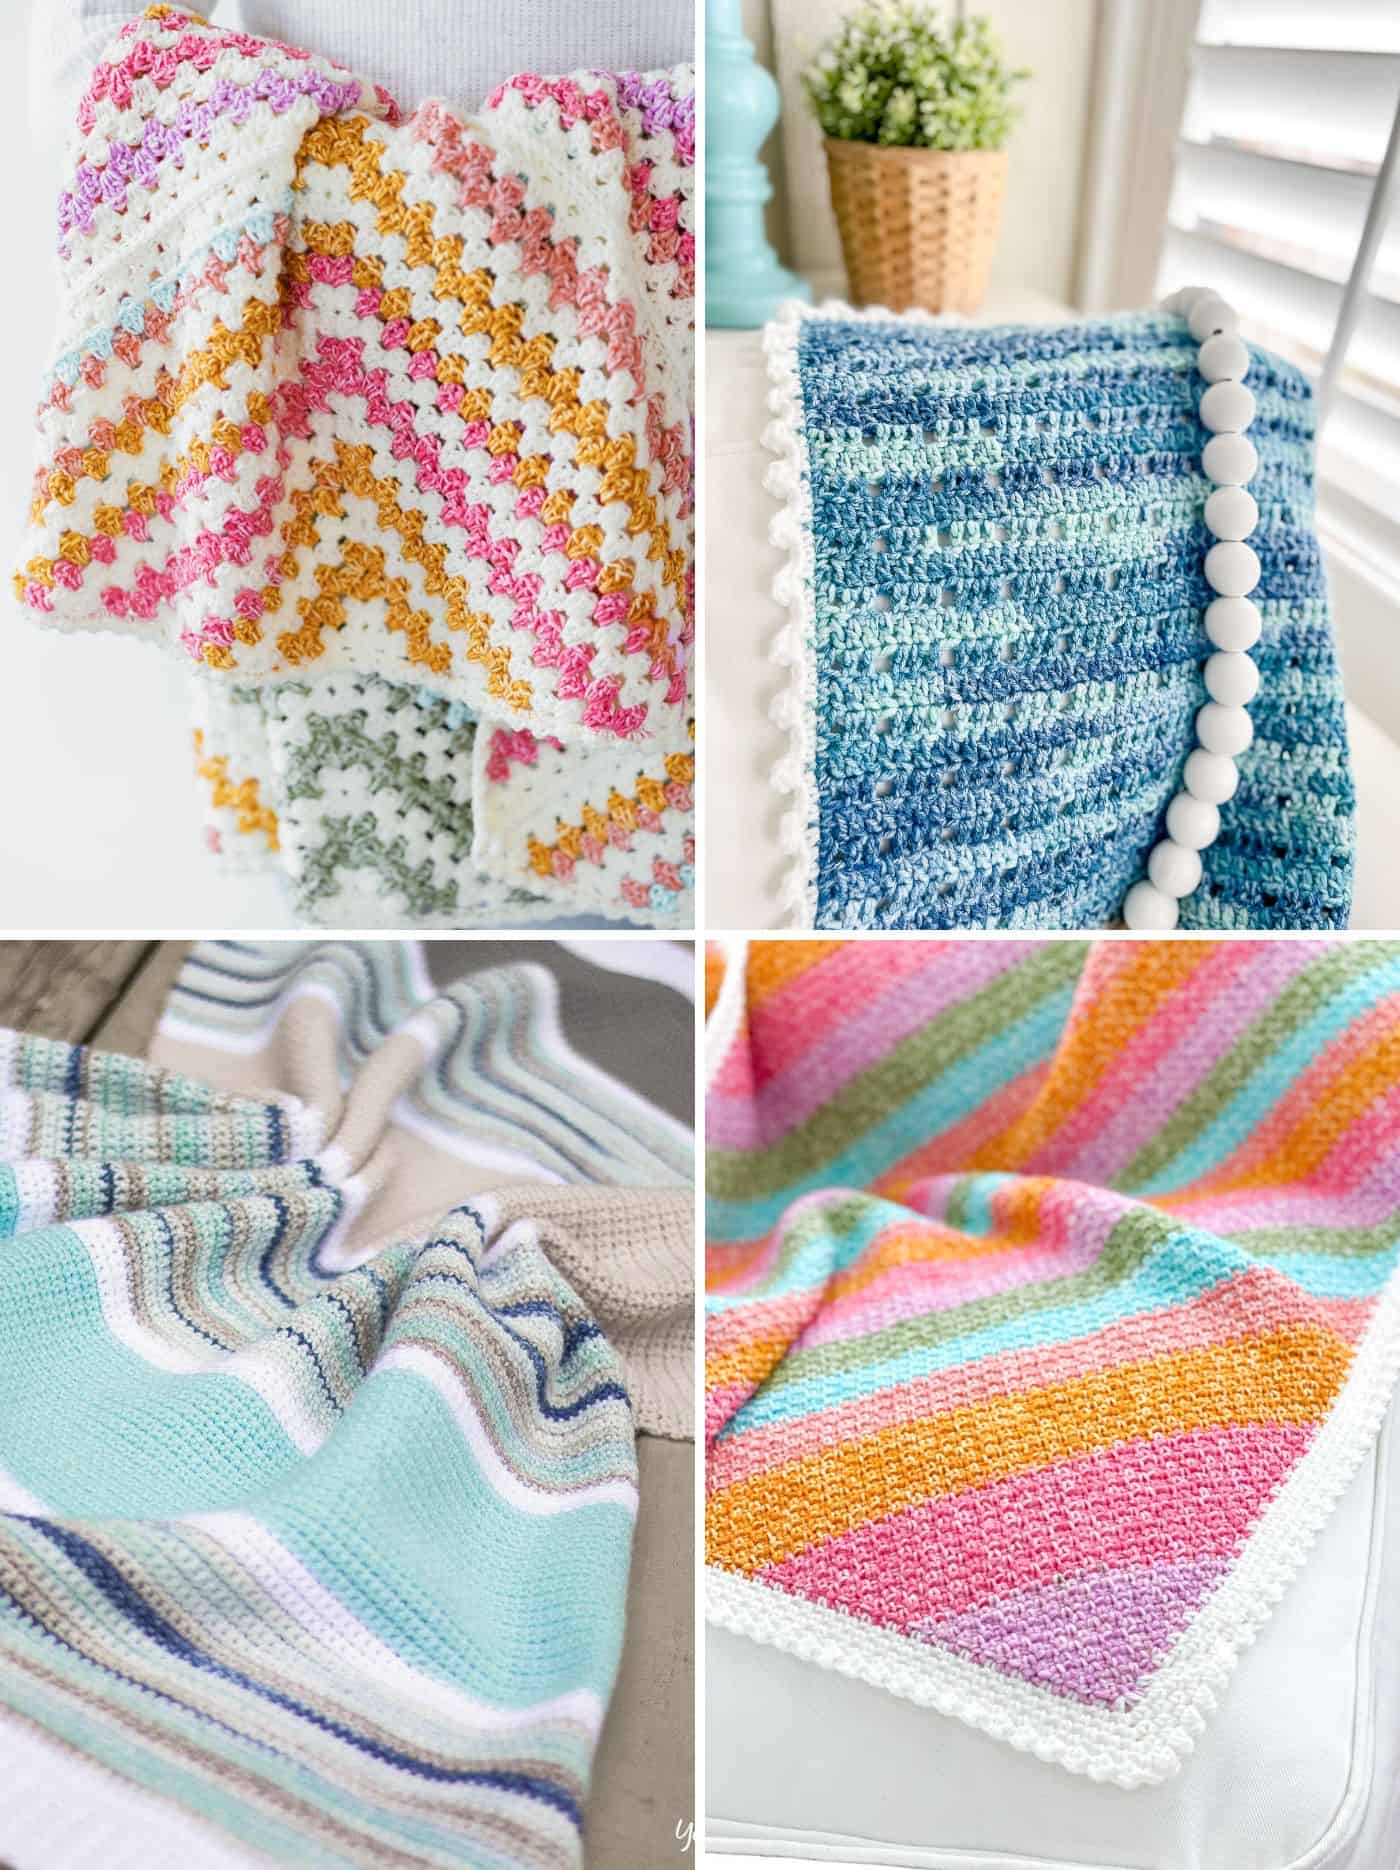 17 Variegated Yarn Crochet Patterns (All Free!) - Daisy Cottage